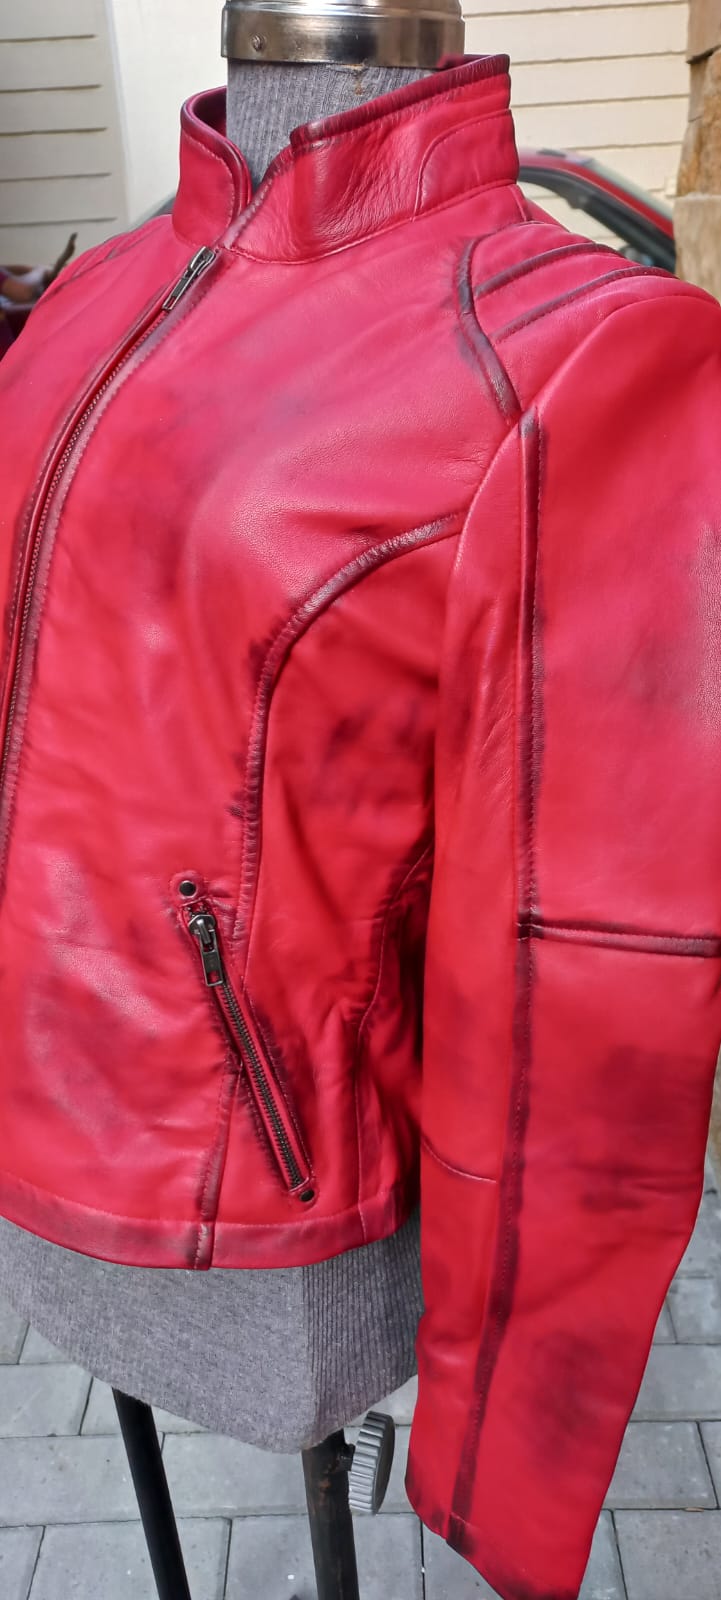 Vintage Hot Red Women's Leather Jacket